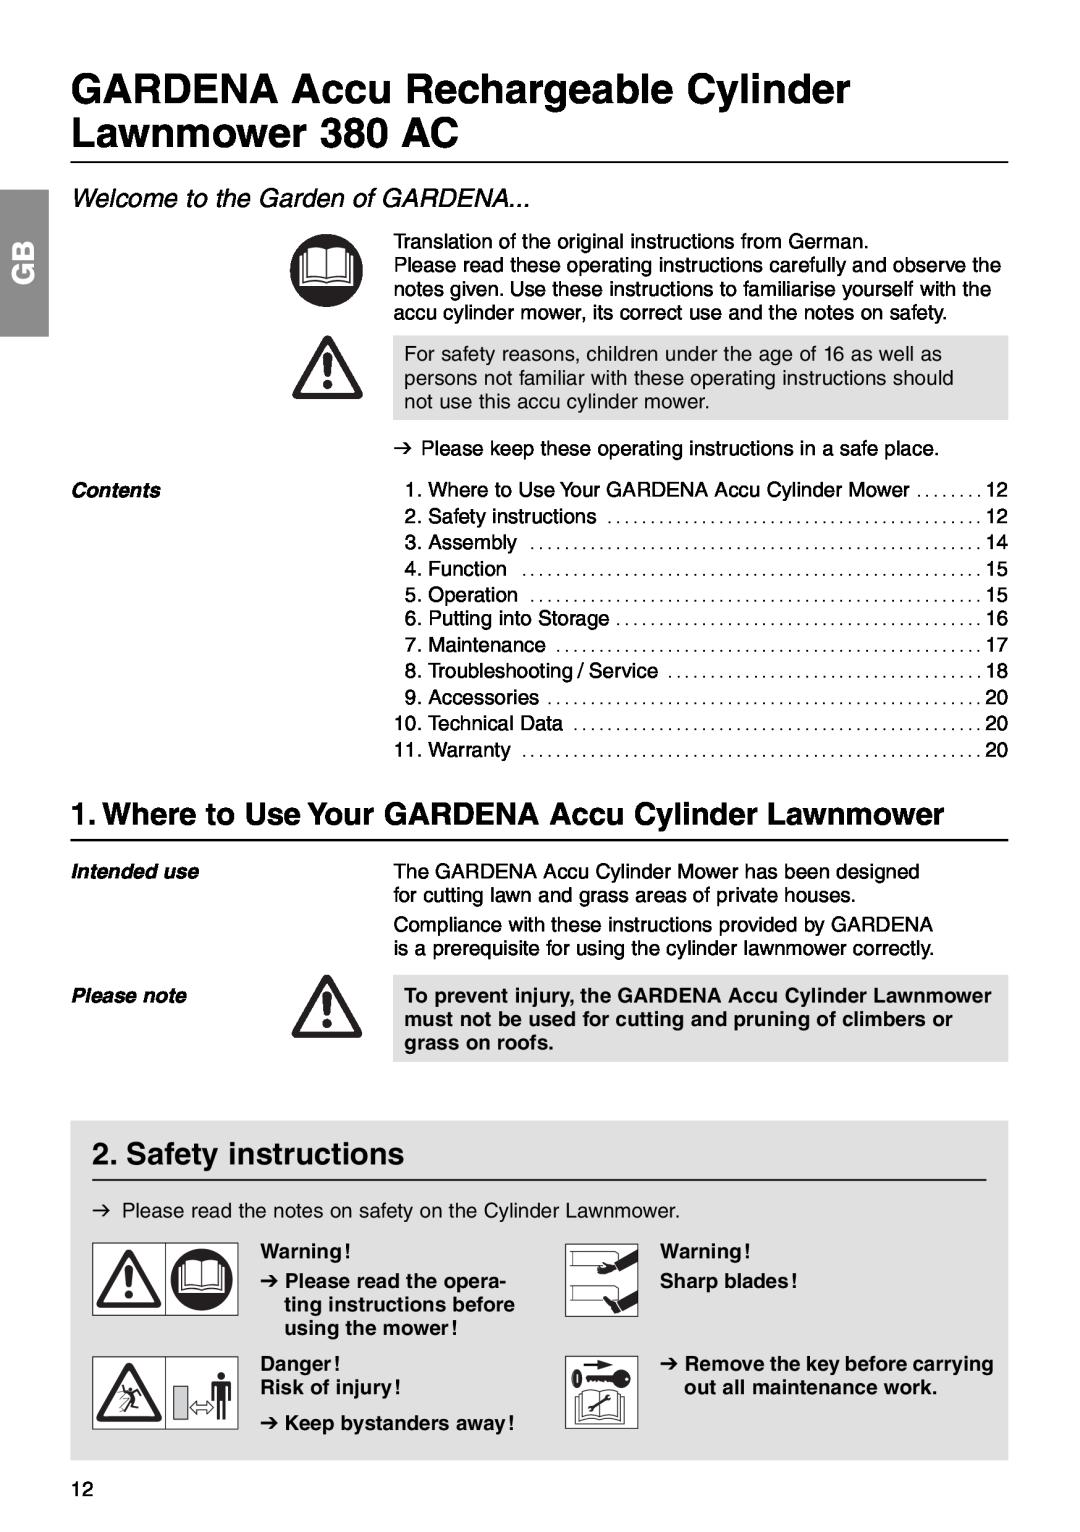 Gardena 380 AC Safety instructions, Welcome to the Garden of GARDENA, Contents, Intended use, Please note, grass on roofs 